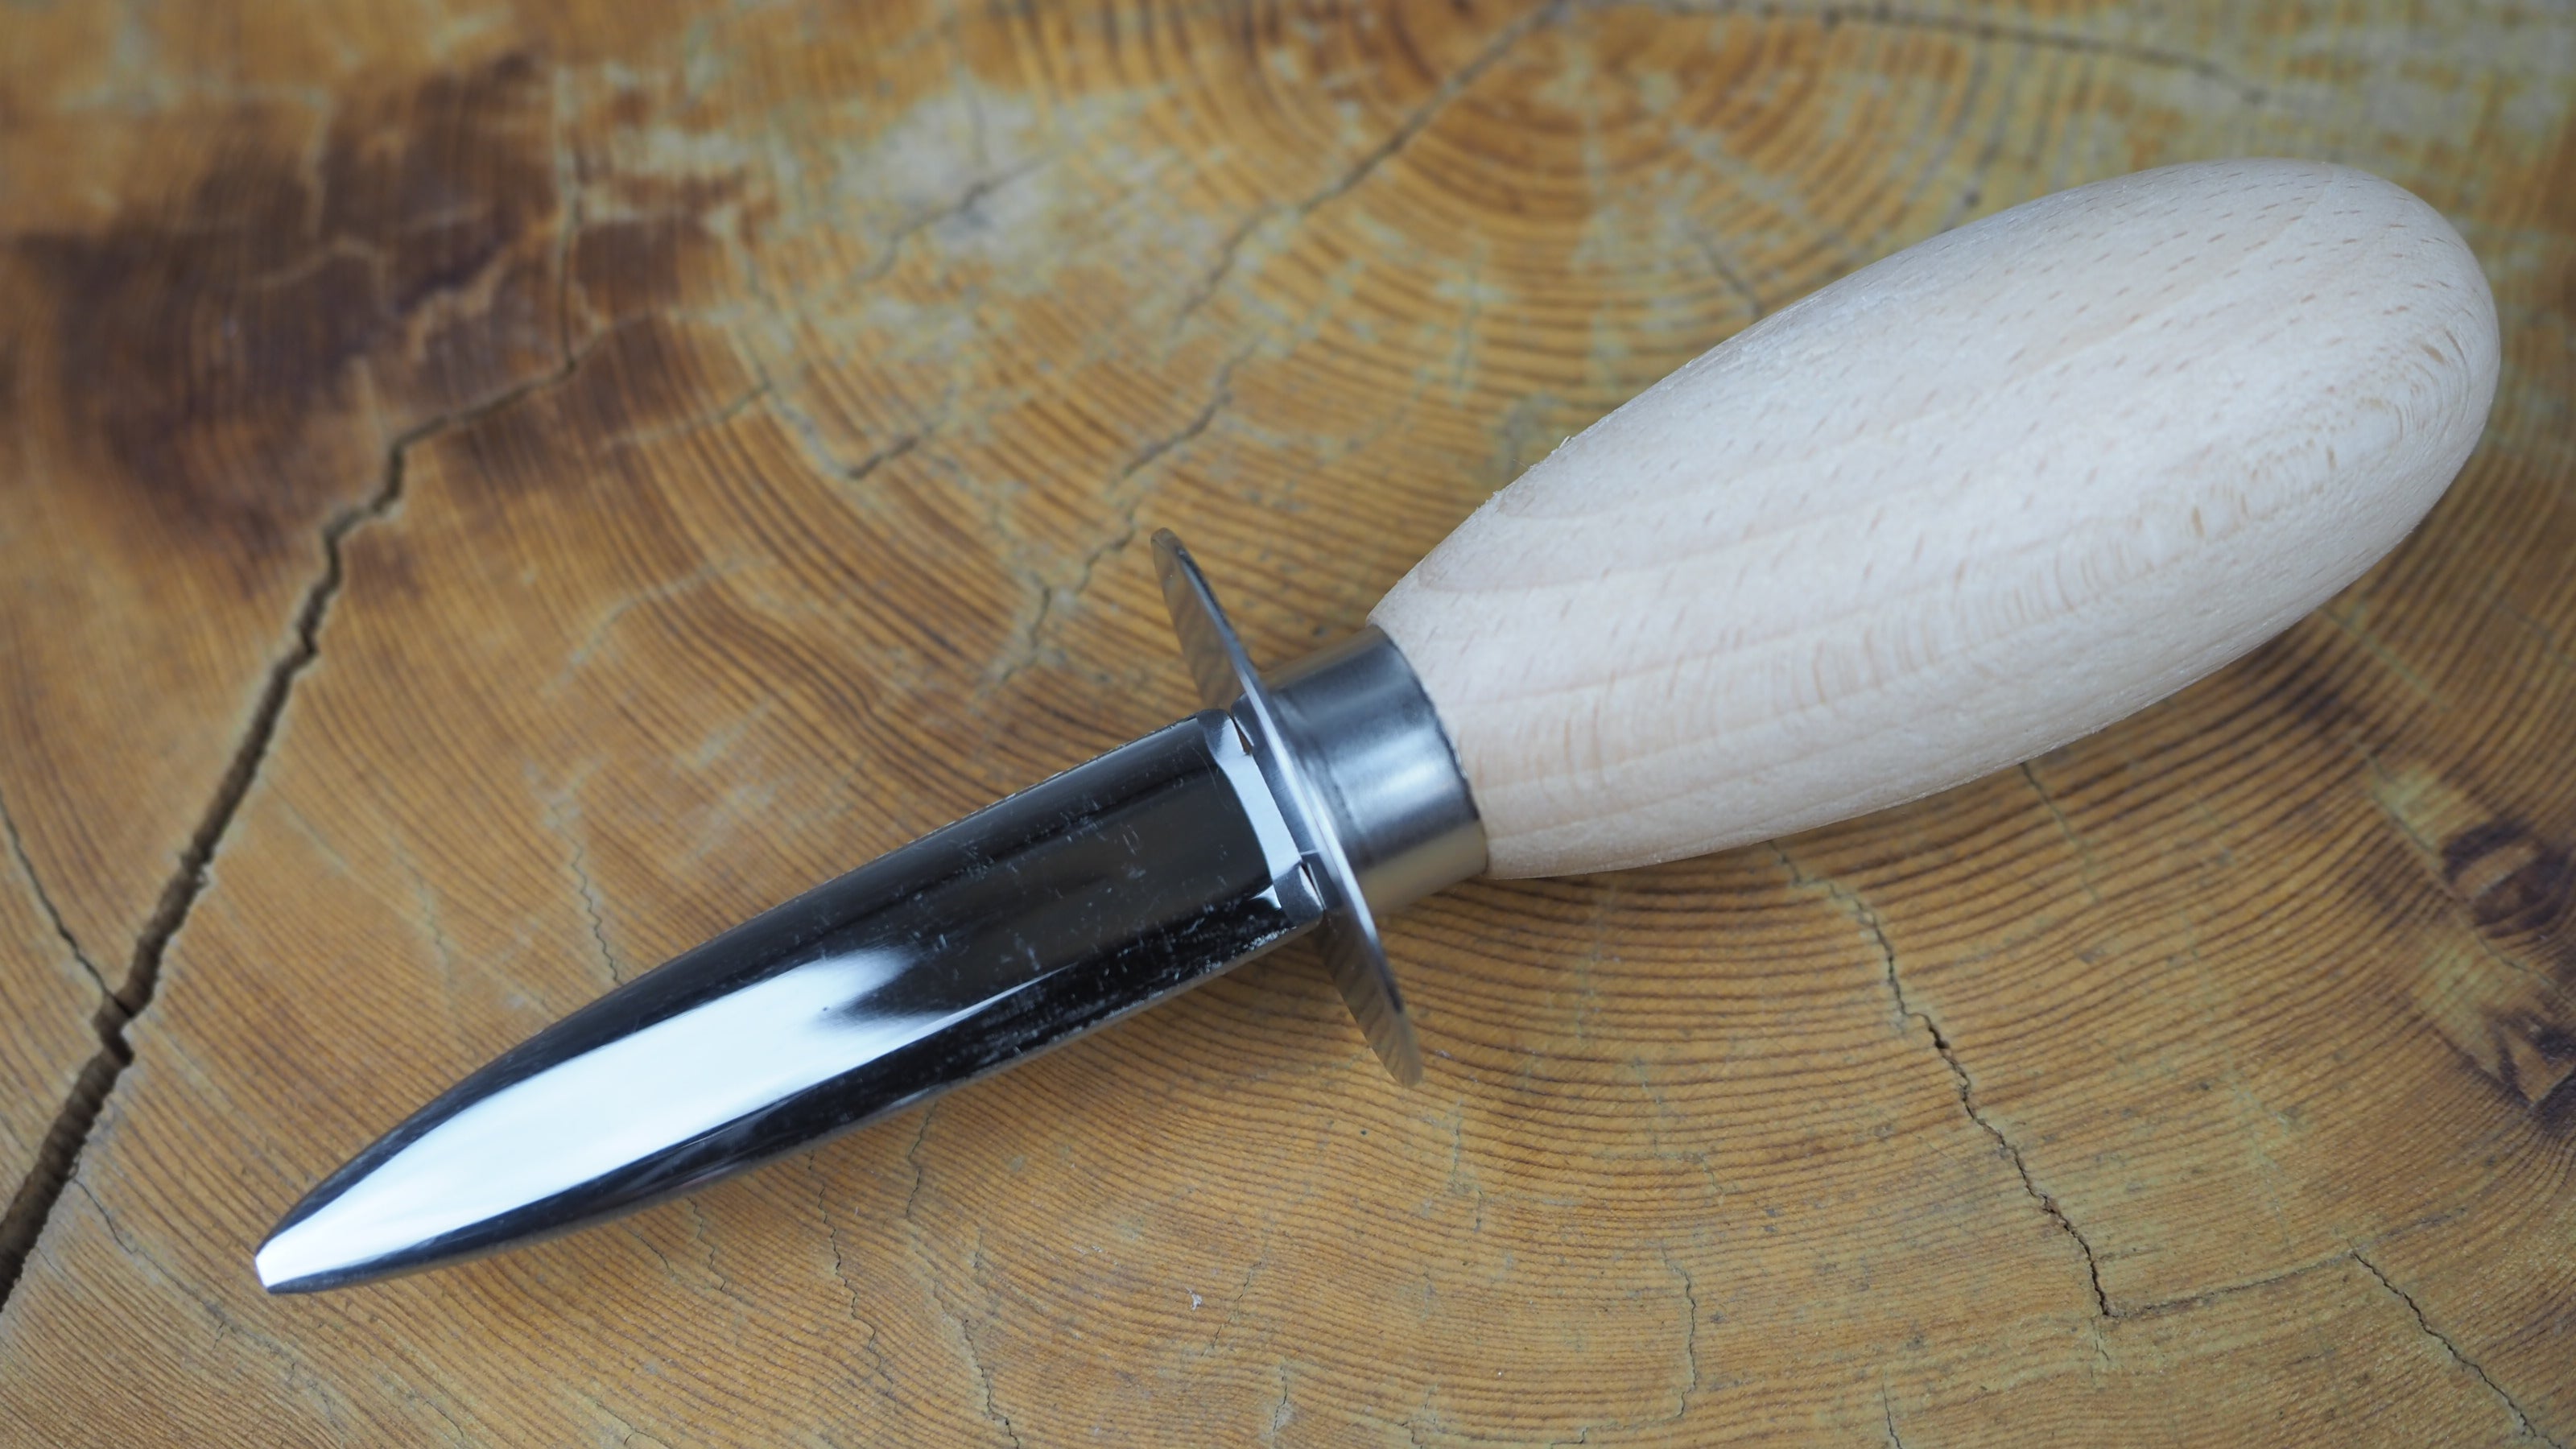 Stainless Steel Japanese Oyster Knife [Small]